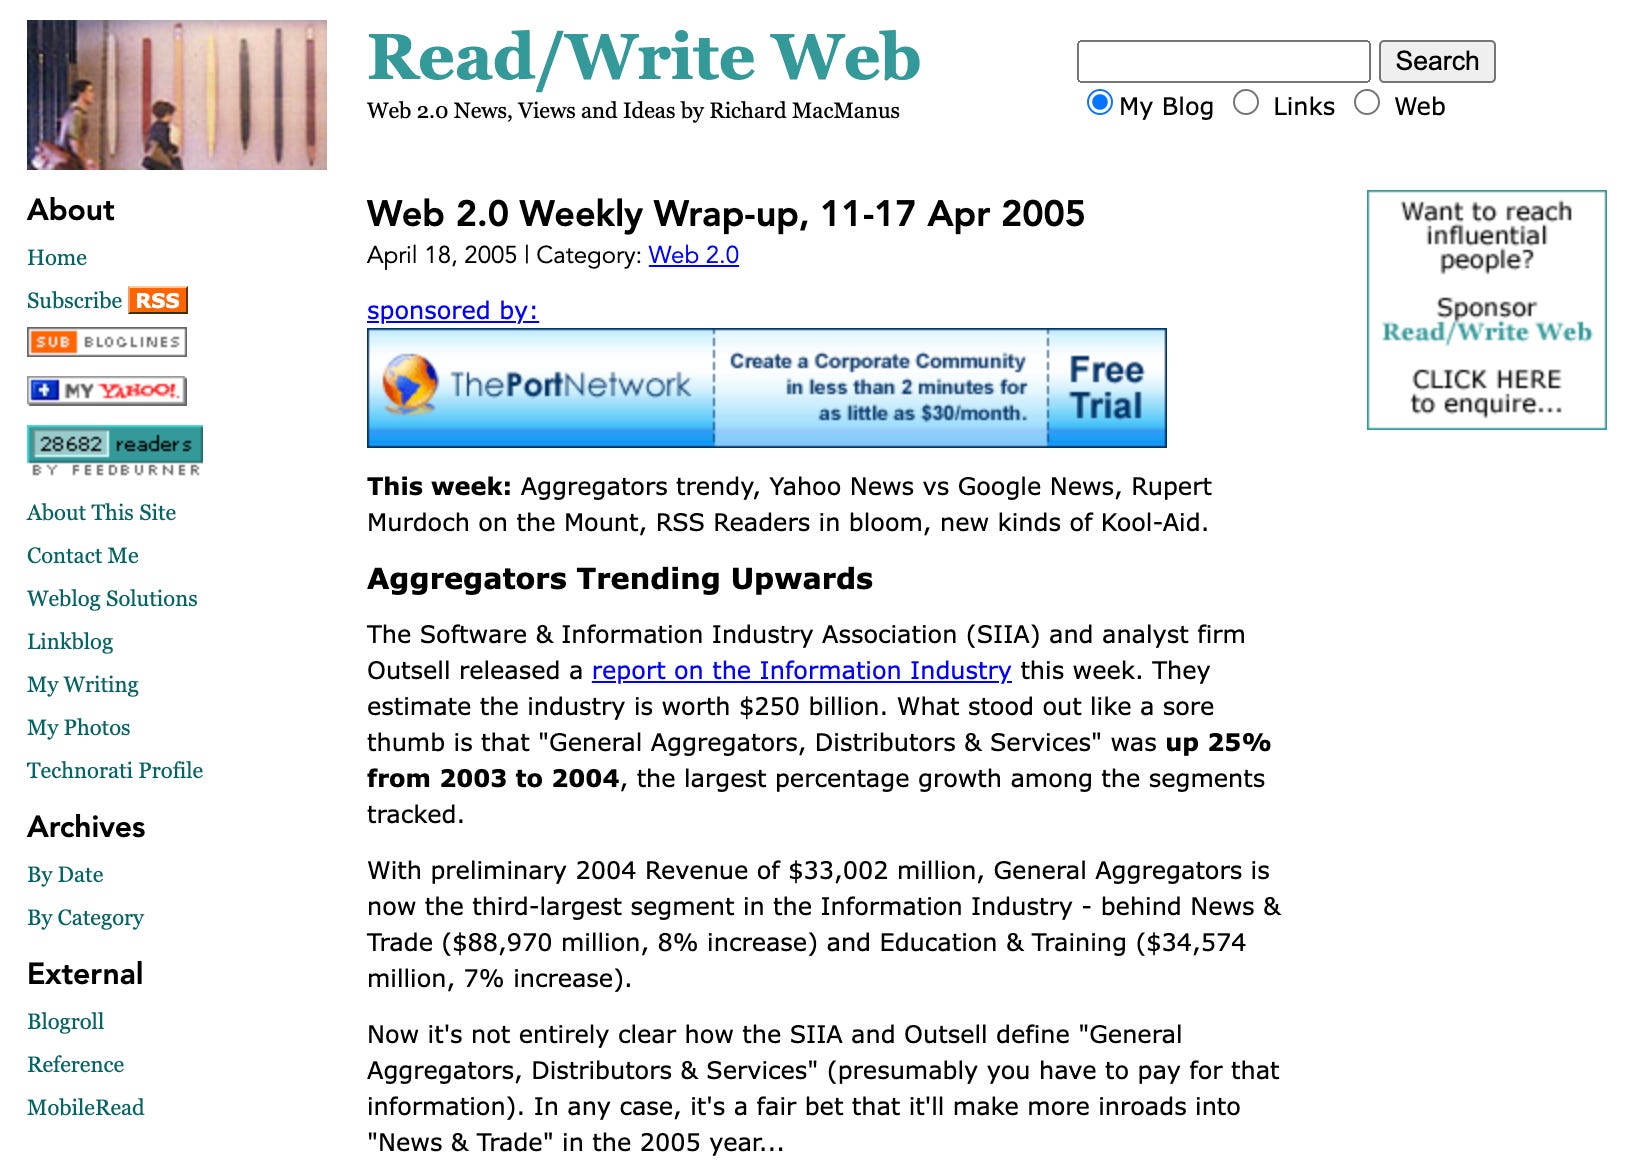 ThePort Network was ReadWriteWeb’s first banner sponsor, in April 2005.